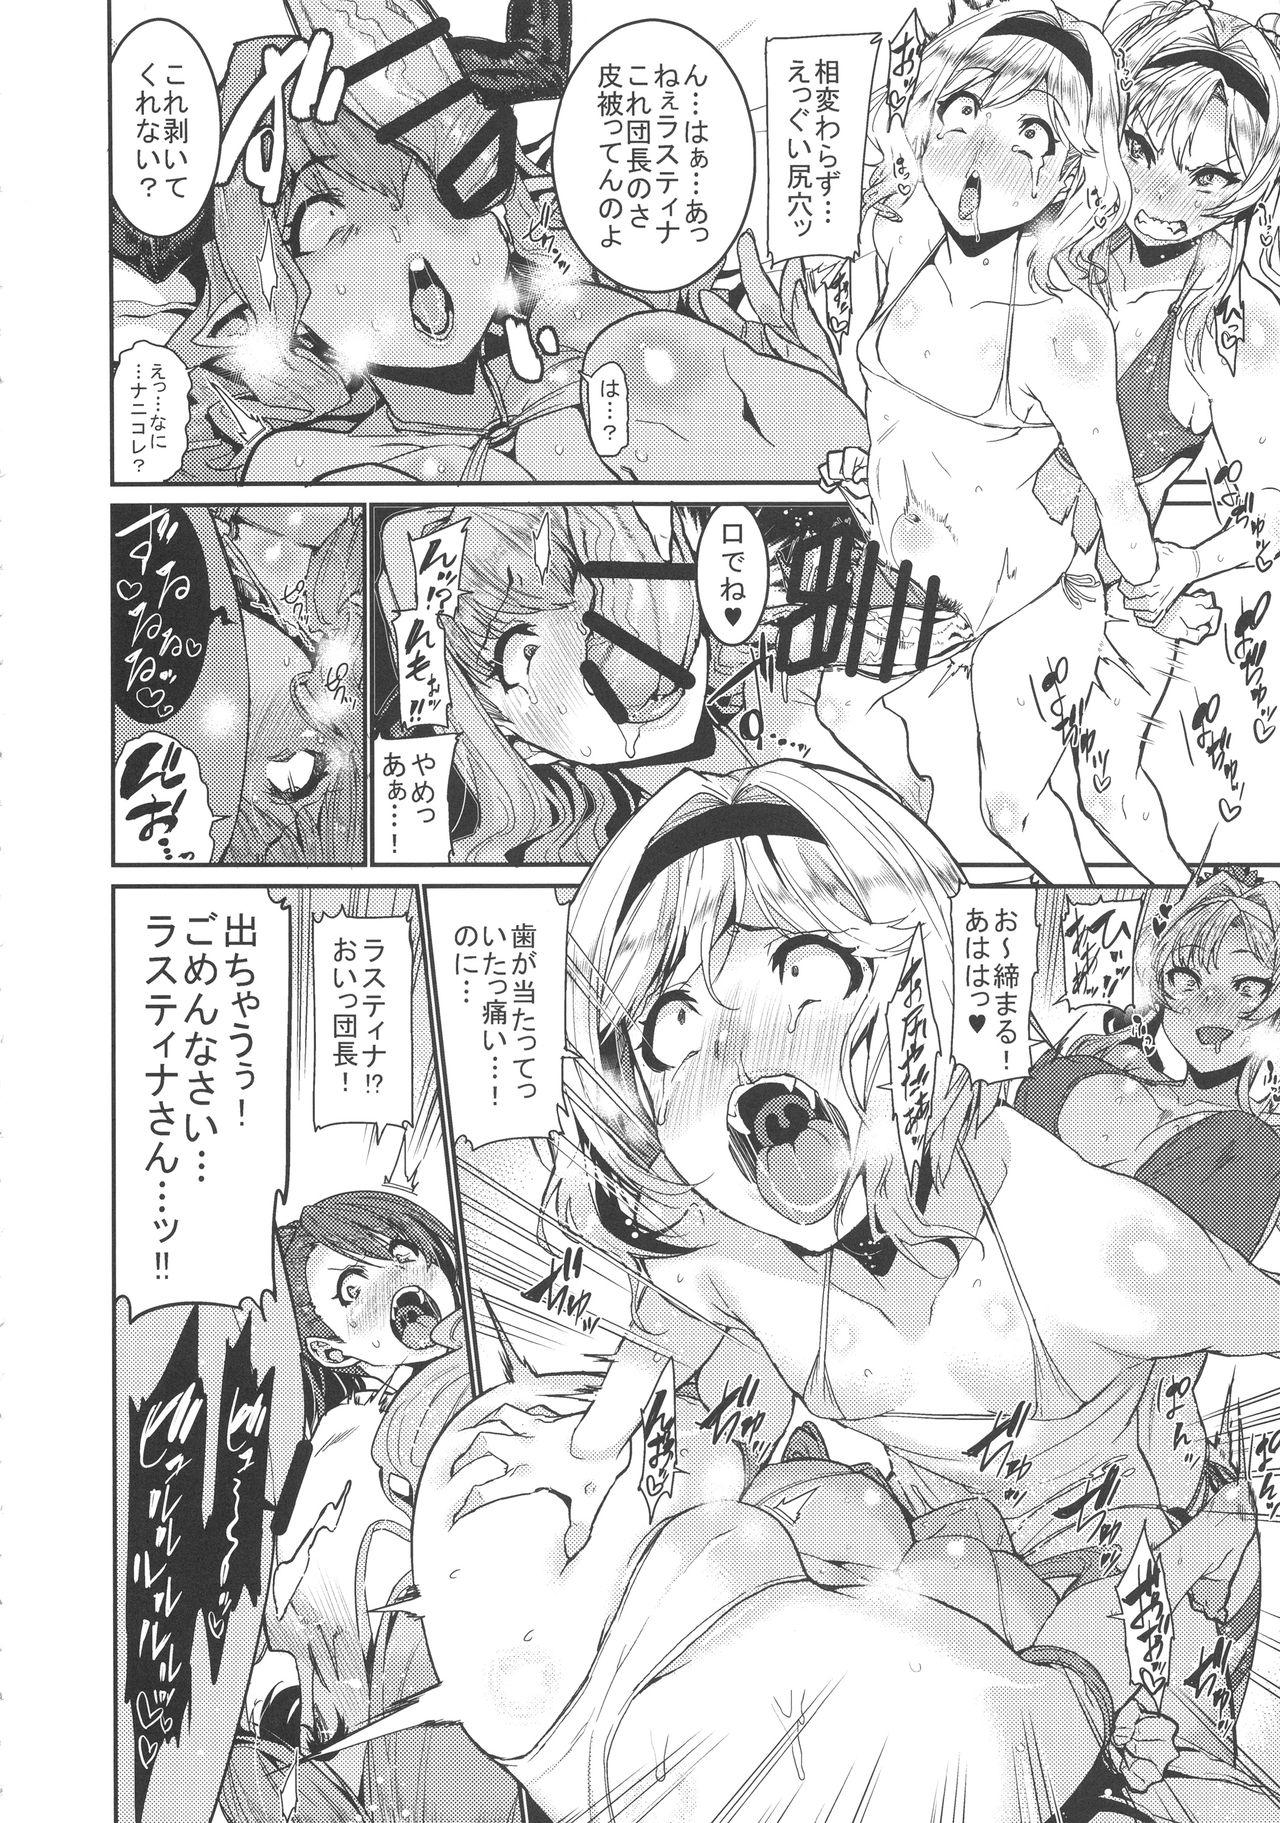 Wank Be covered, be smeared – Granblue fantasy Girlsfucking - Chapter 11